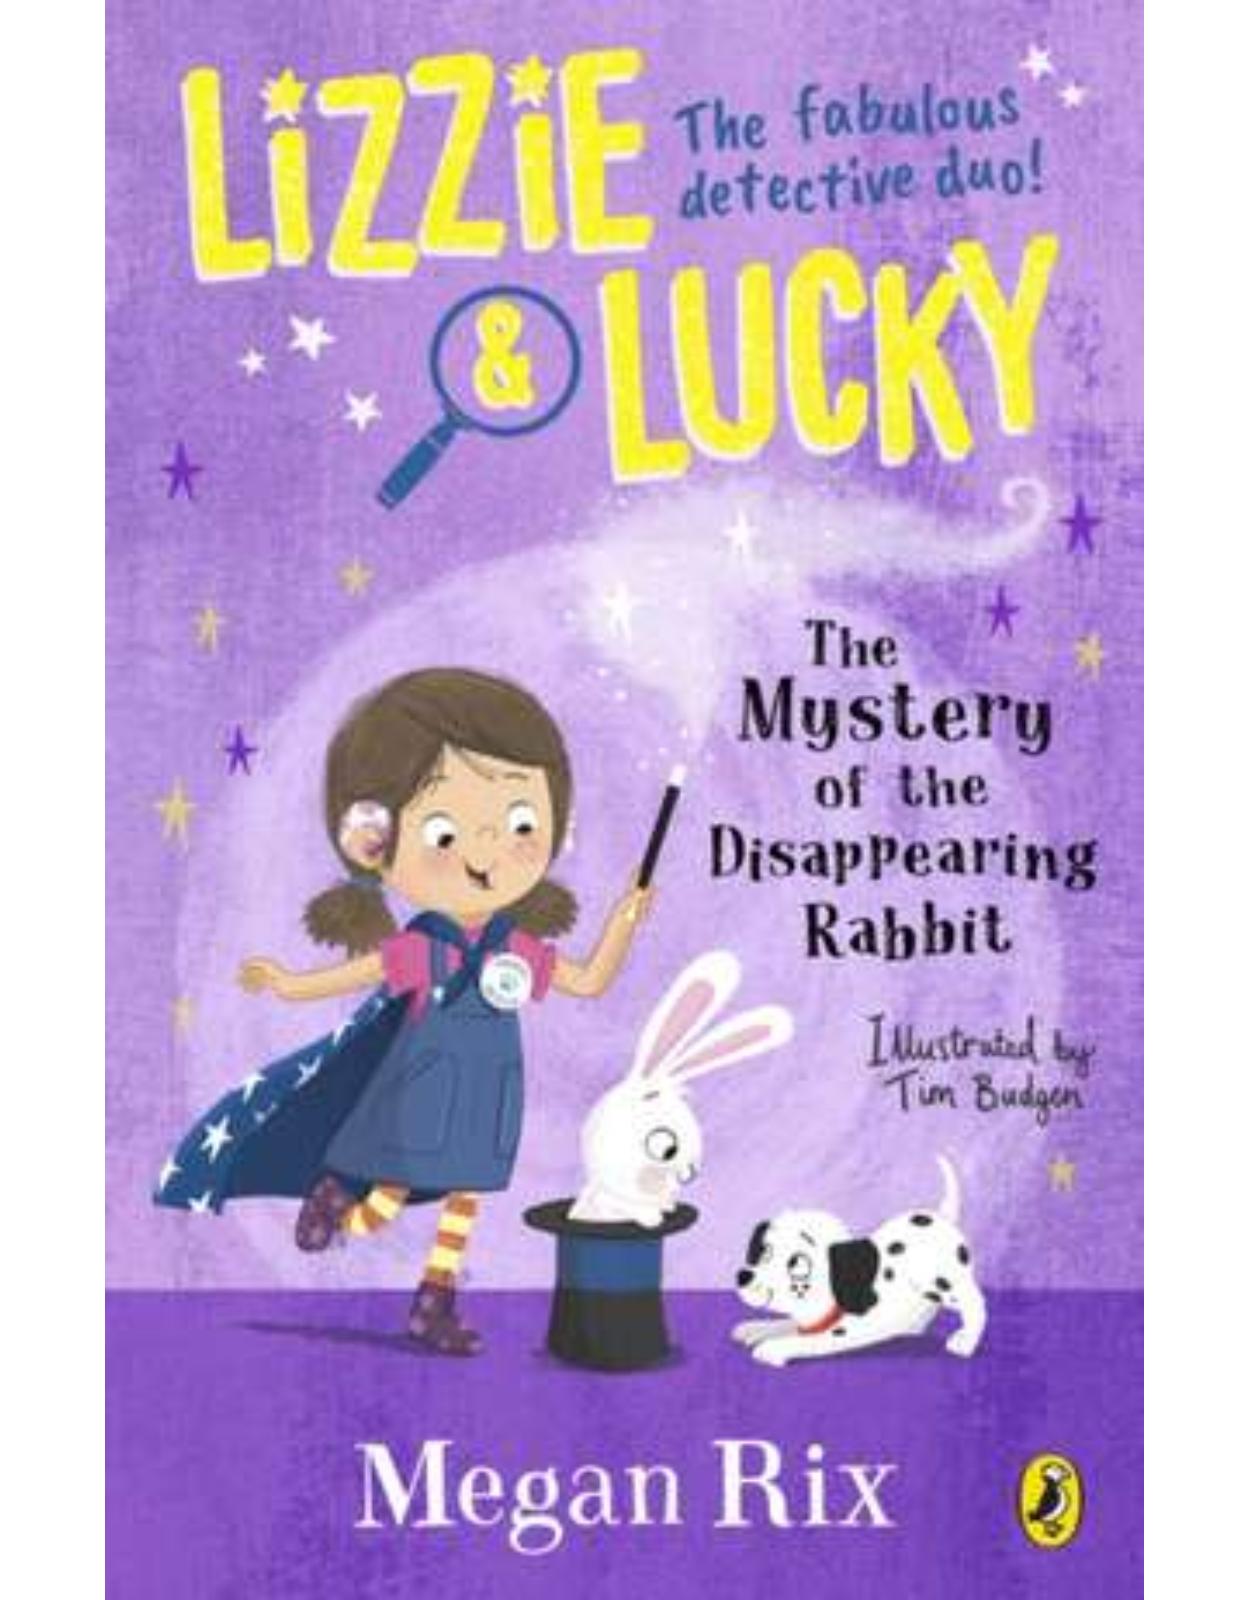 Lizzie and Lucky: The Mystery of the Disappearing Rabbit